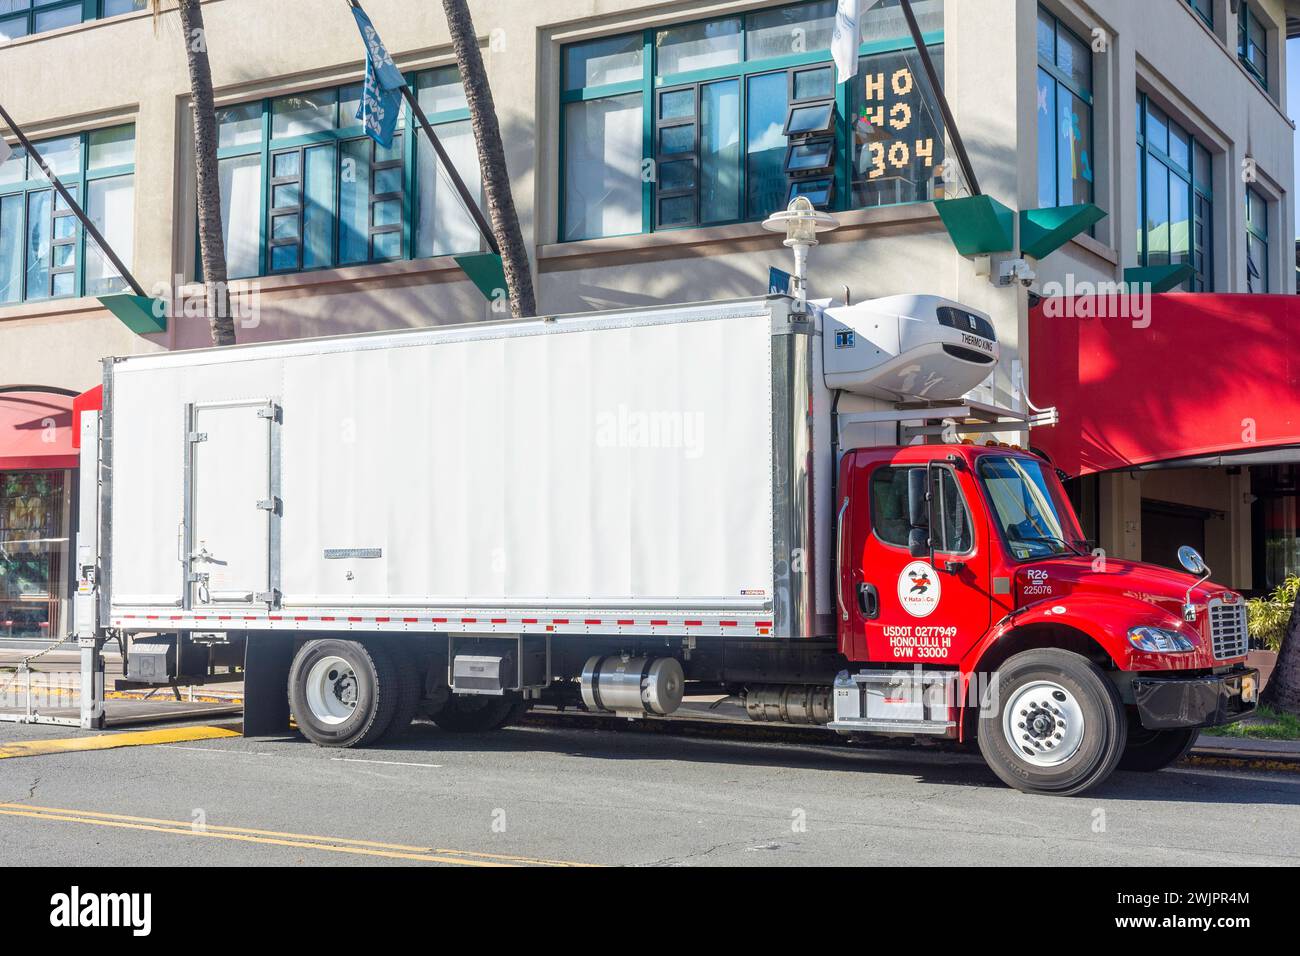 Refrigeration truck delivering food at Aloha Tower Marketplace, Honolulu, Oahu, Hawaii, United States of America Stock Photo